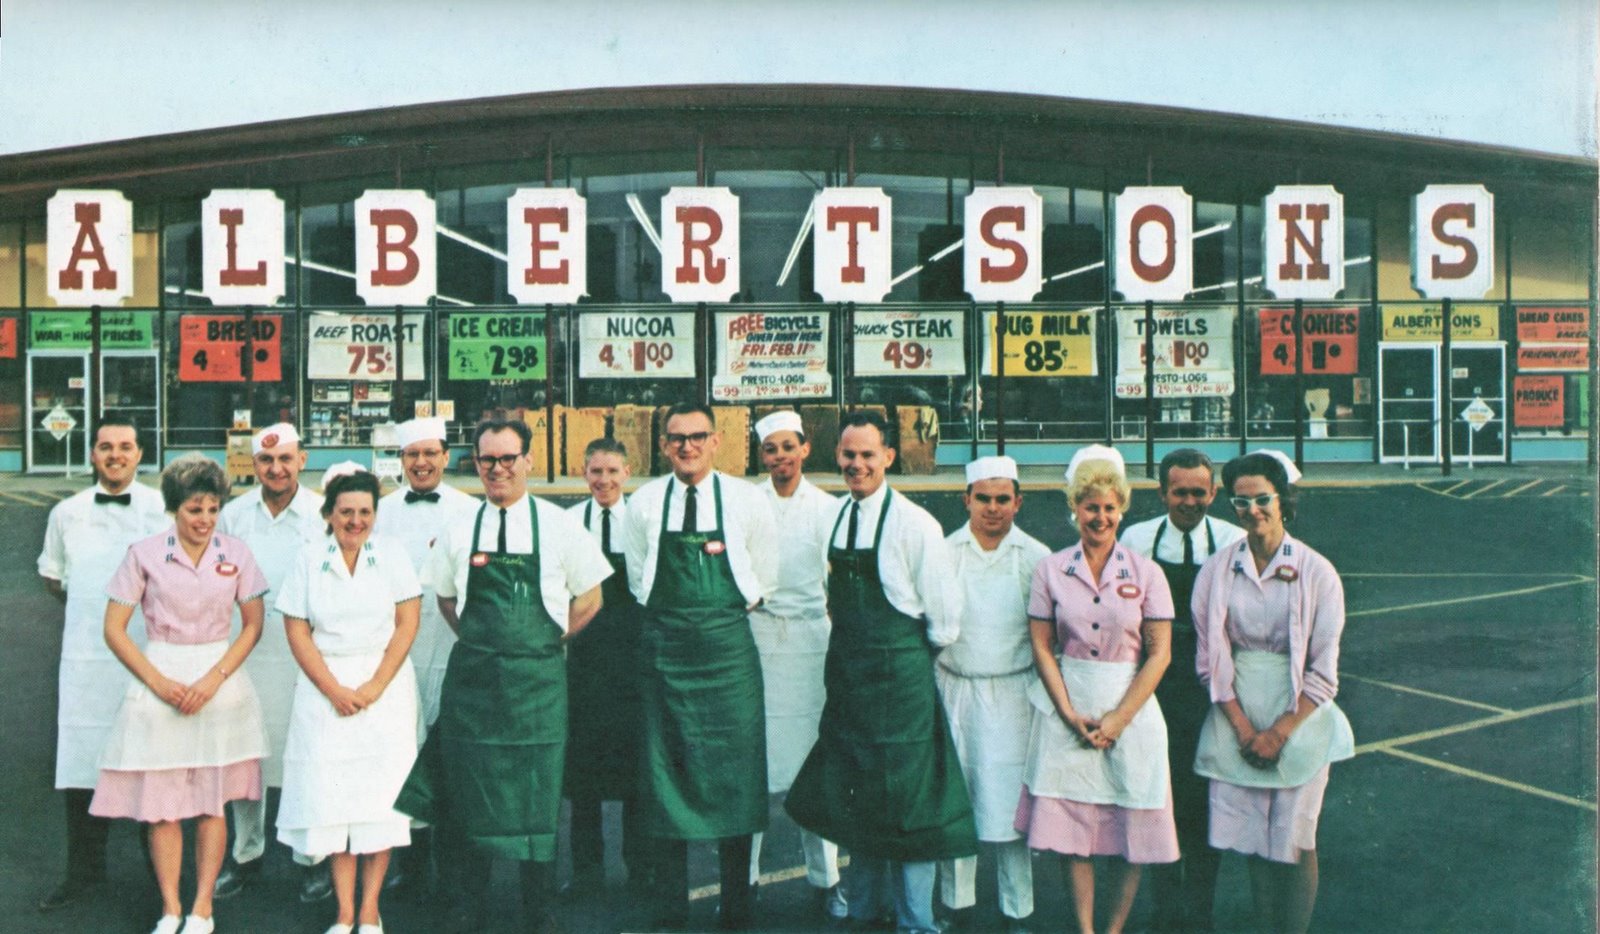 Albertsons - location unknown - 1966